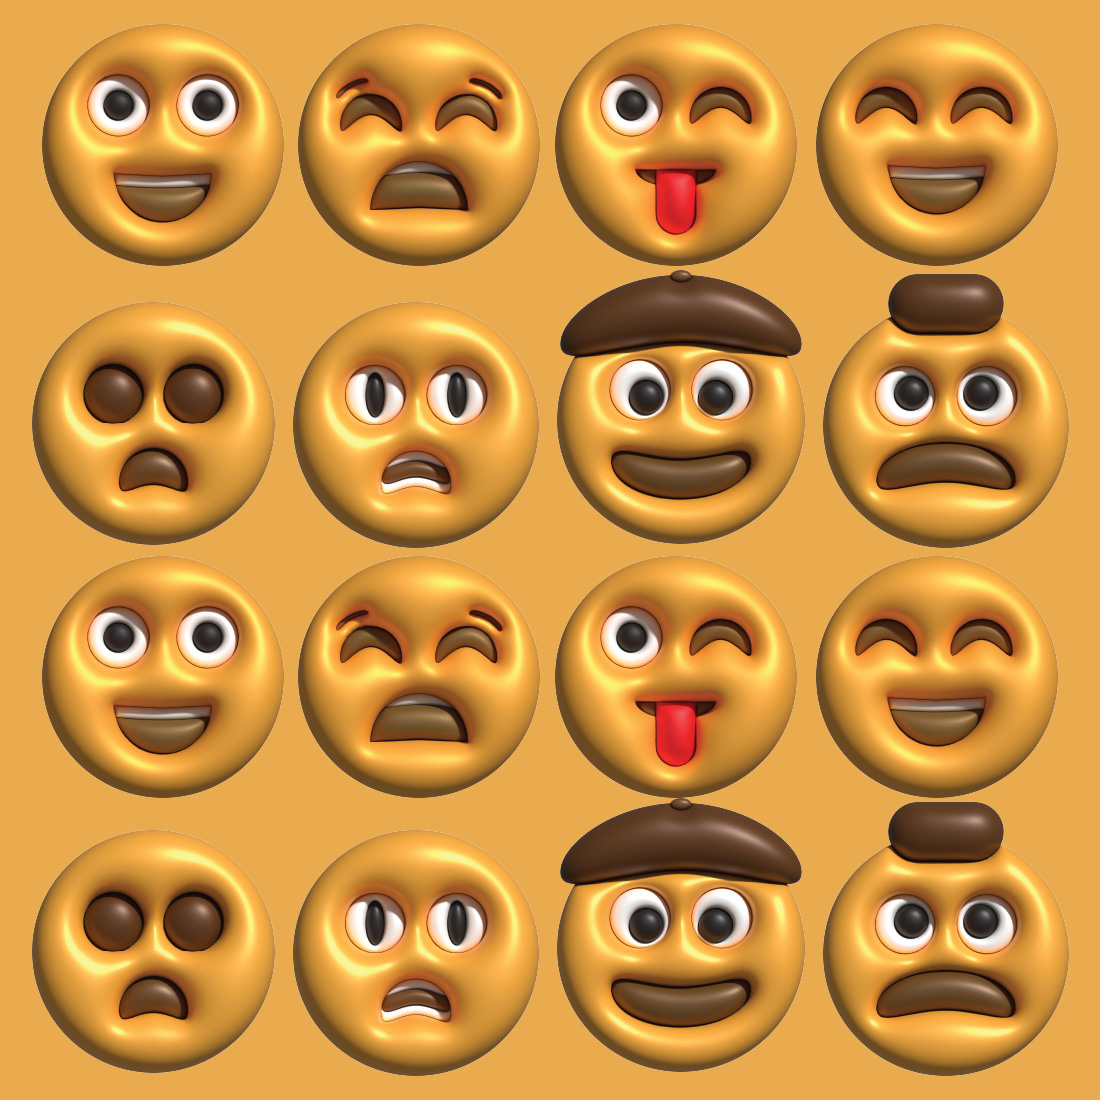 Group of emoticions with different facial expressions.